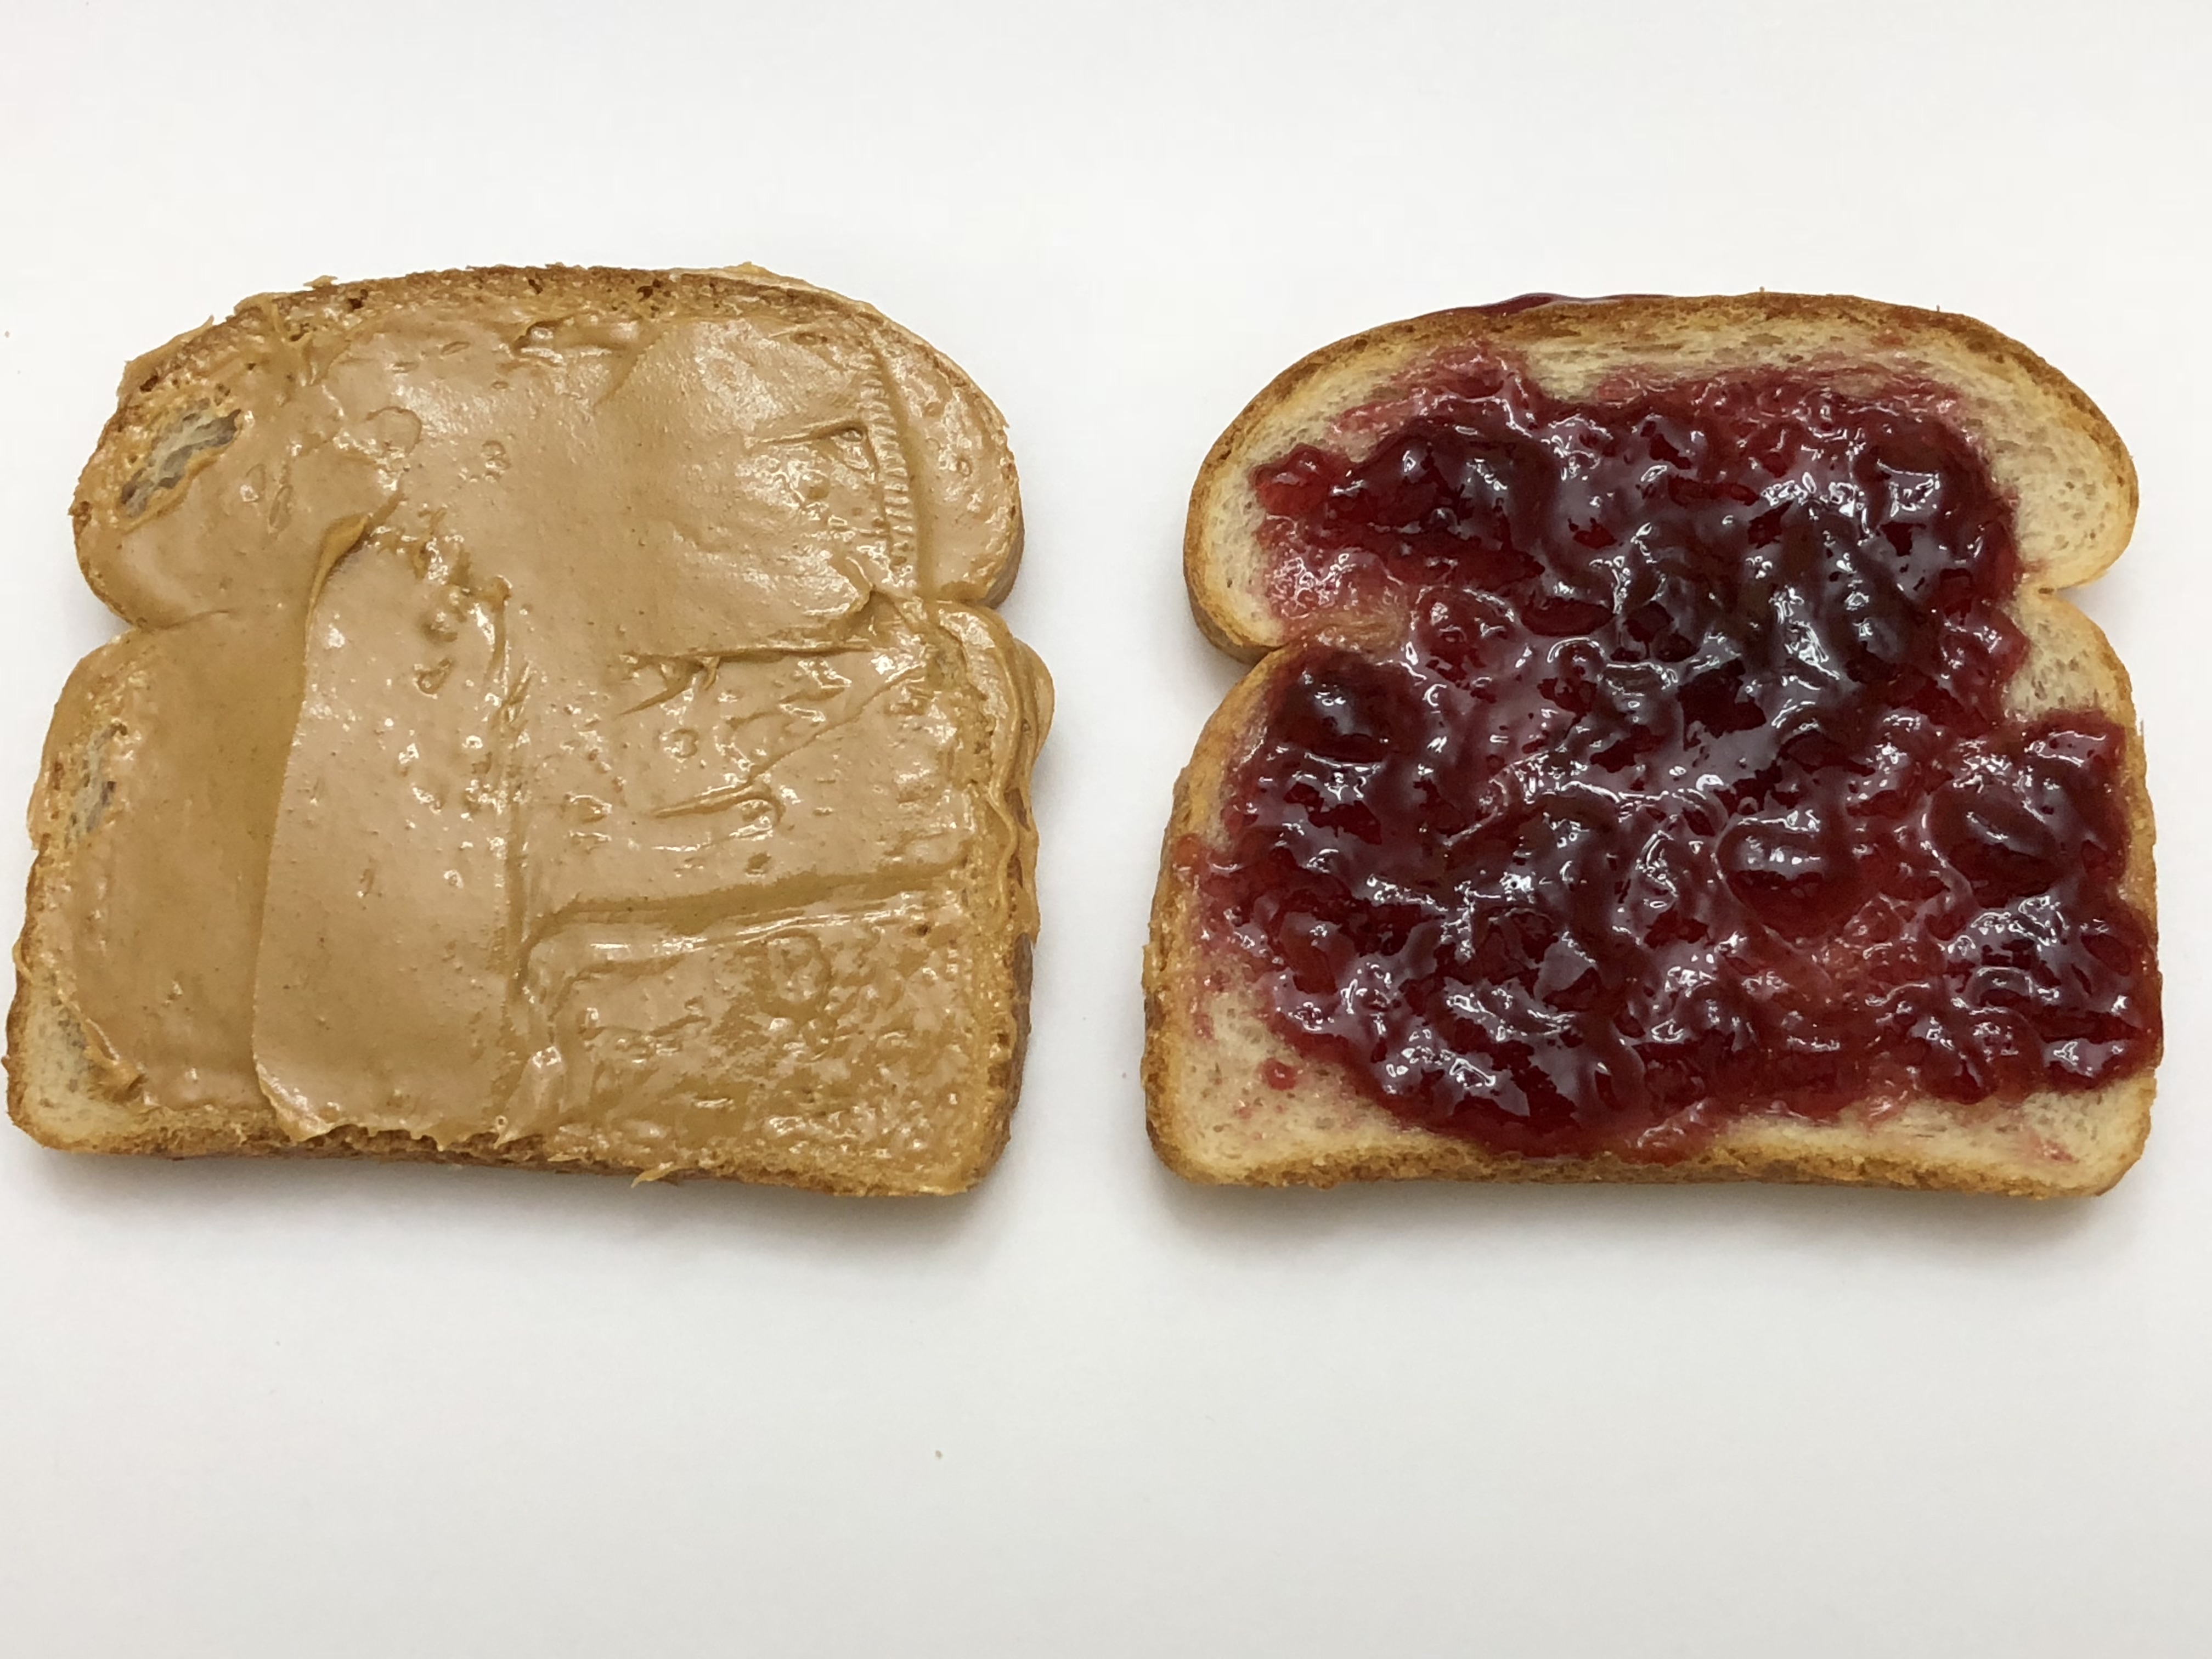 https://upload.wikimedia.org/wikipedia/commons/0/06/2020-05-05_00_08_06_Two_slices_of_Sara_Lee_white_whole_grain_bread%2C_one_covered_with_Welch%27s_concord_grape_jelly_and_the_other_covered_with_Jif_peanut_butter%2C_in_the_Franklin_Farm_section_of_Oak_Hill%2C_Fairfax_County%2C_Virginia.jpg